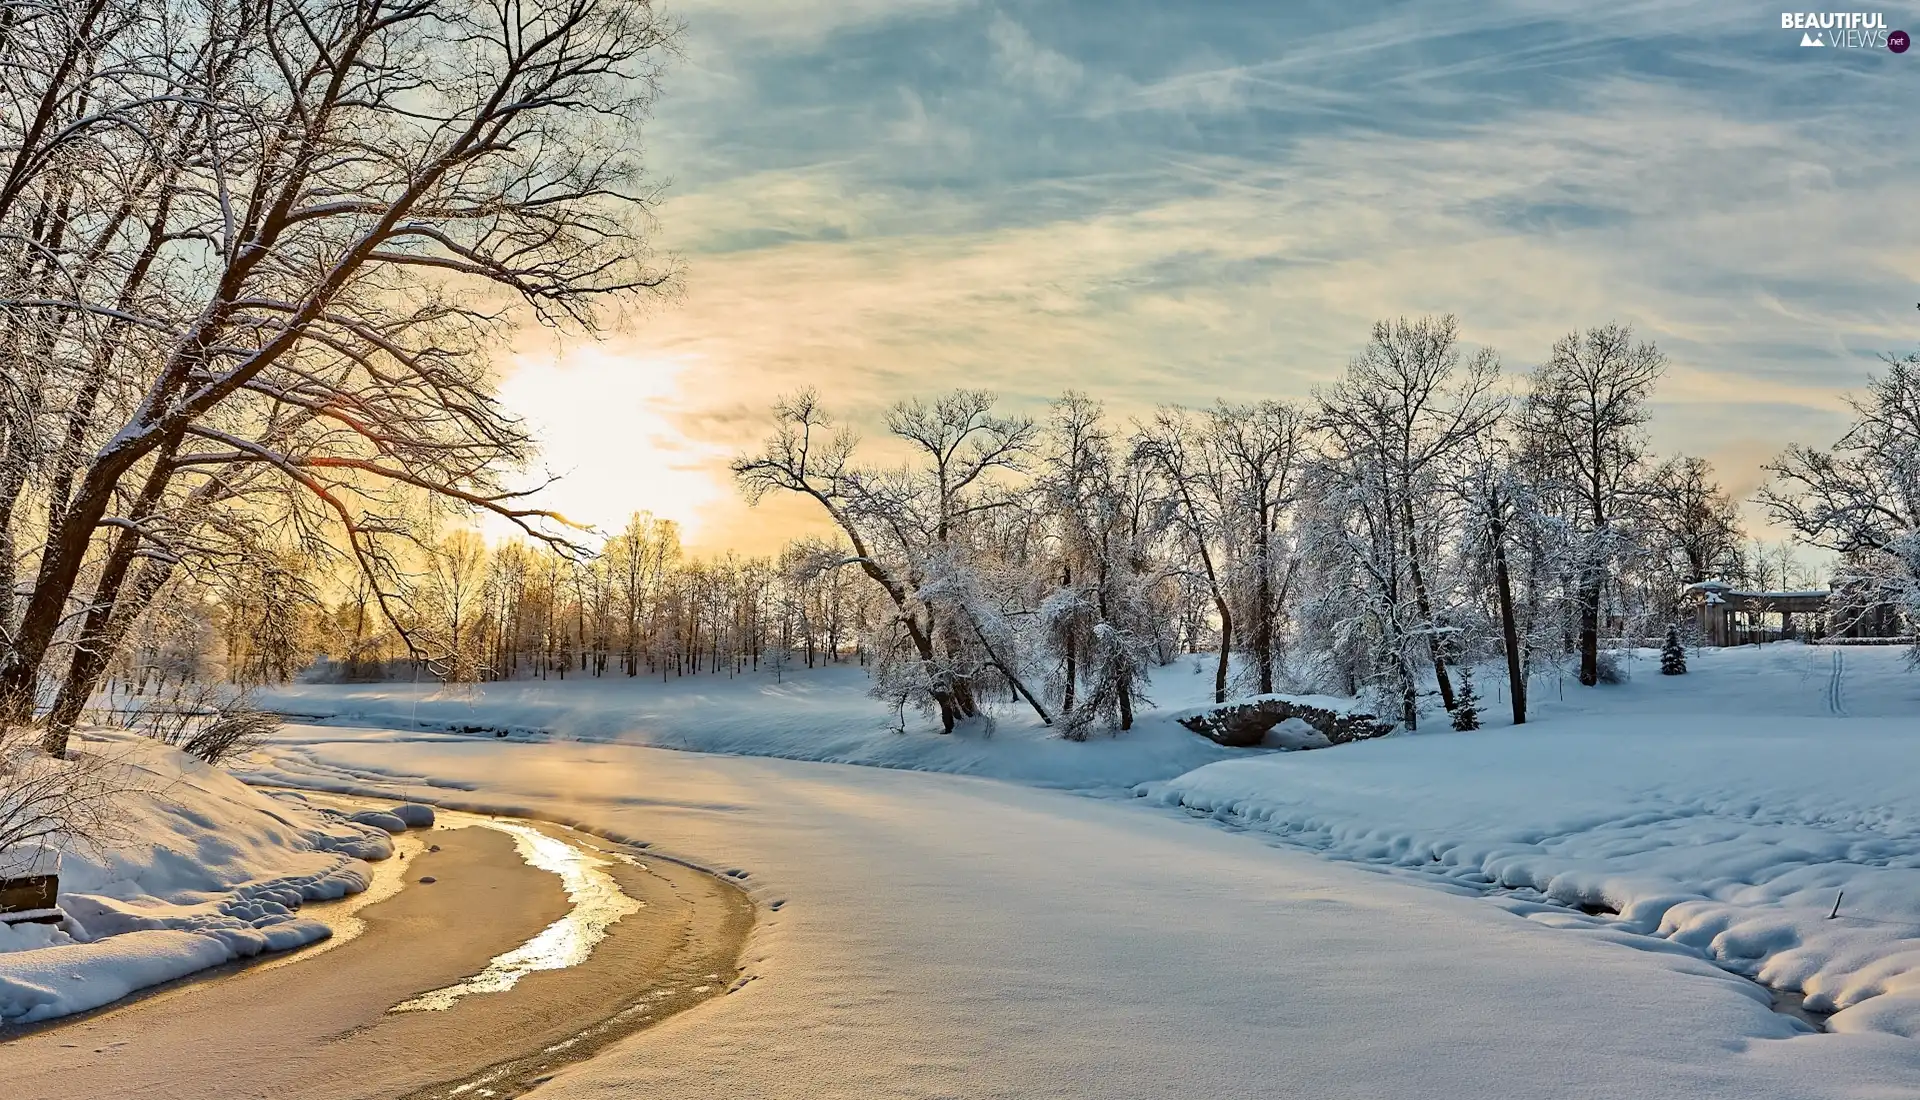 River, winter, viewes, Sunrise, trees, snowy